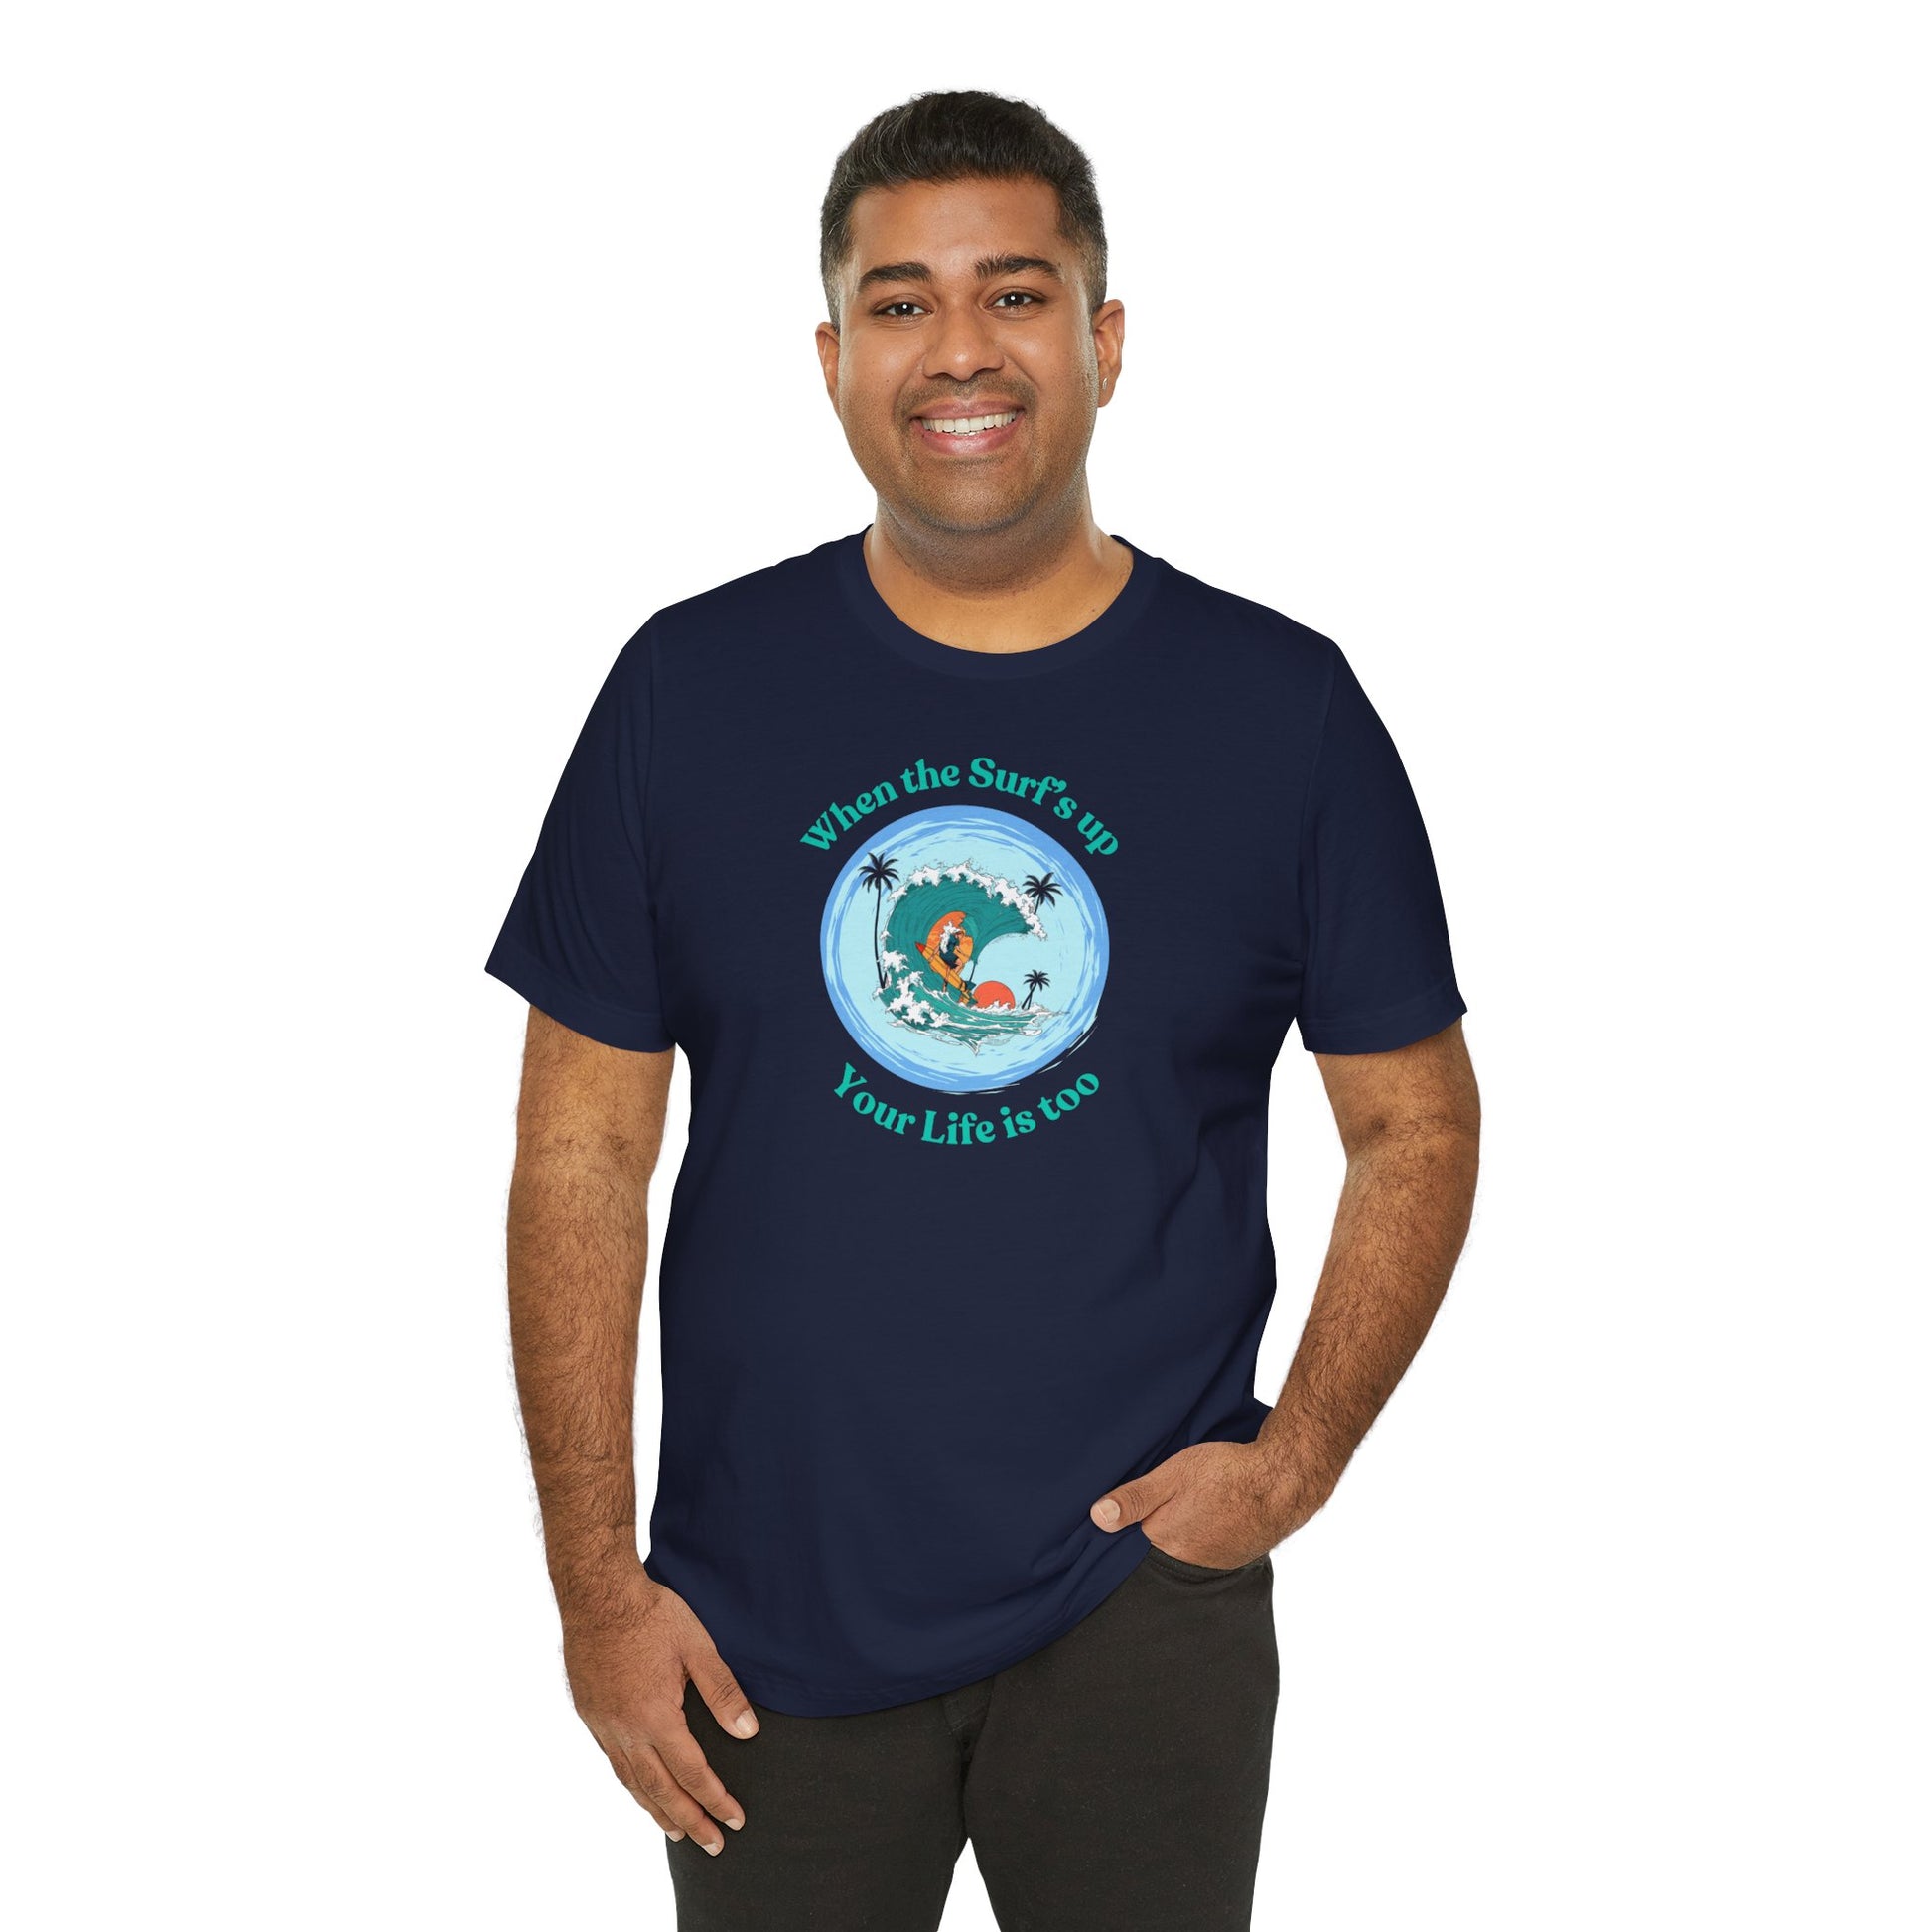 When the Surf's Up your Life is too - Surfing T-Shirt - Soulshinecreators - Bella & Canvas